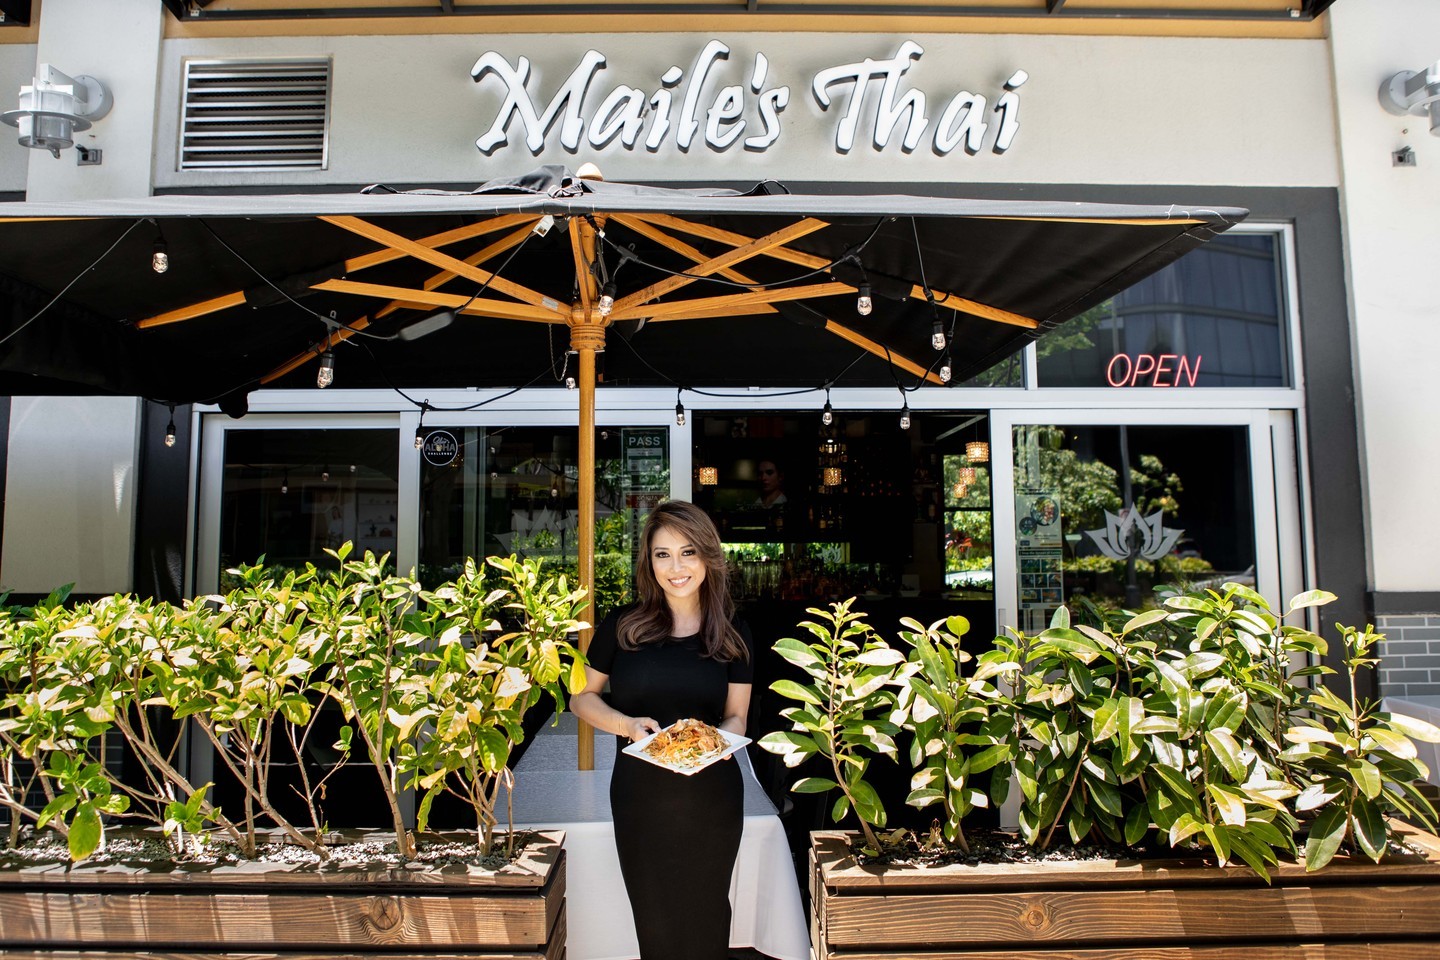 Looking for new options for your lunch or dinner plans? @mailesthaibistro is open from 11am to serve Thai food with a local twist. Whether you are craving papaya salad, seafood curry or a unique beverage, Maile&#039;s Thai Bistro has inventive and traditional offerings that satisfy — with indoor dining and outdoor seating available!